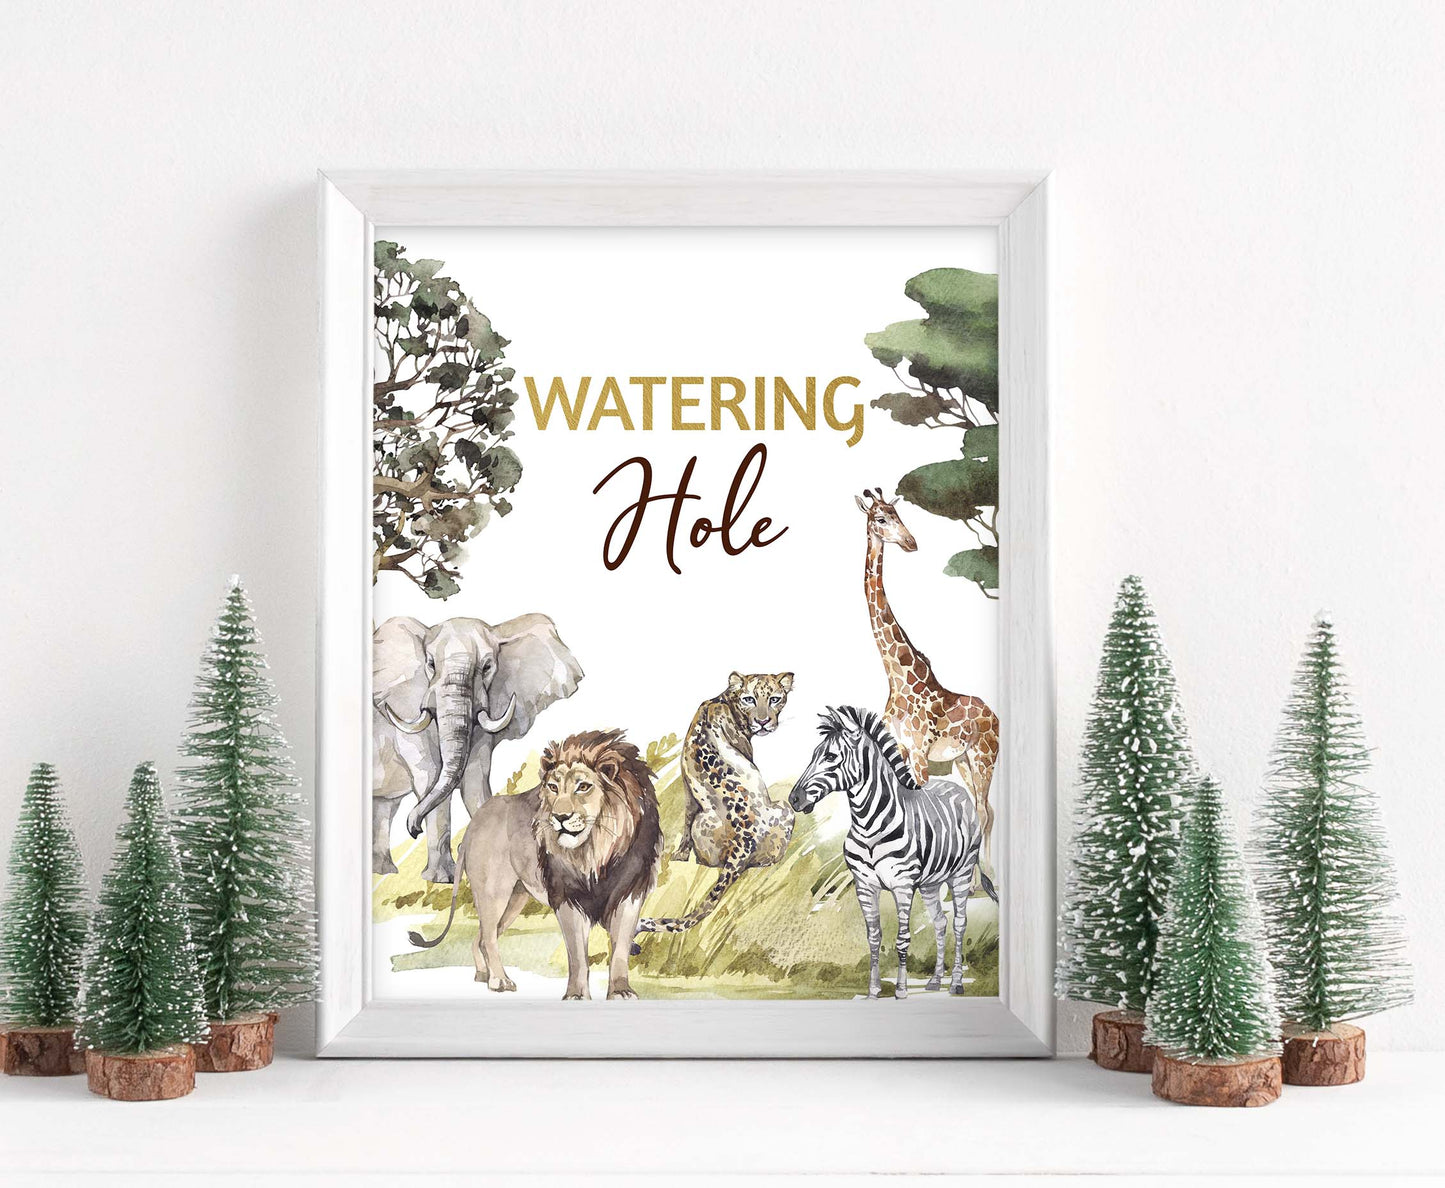 Safari Watering Hole table sign | Jungle Themed Party Table Decorations - 35I